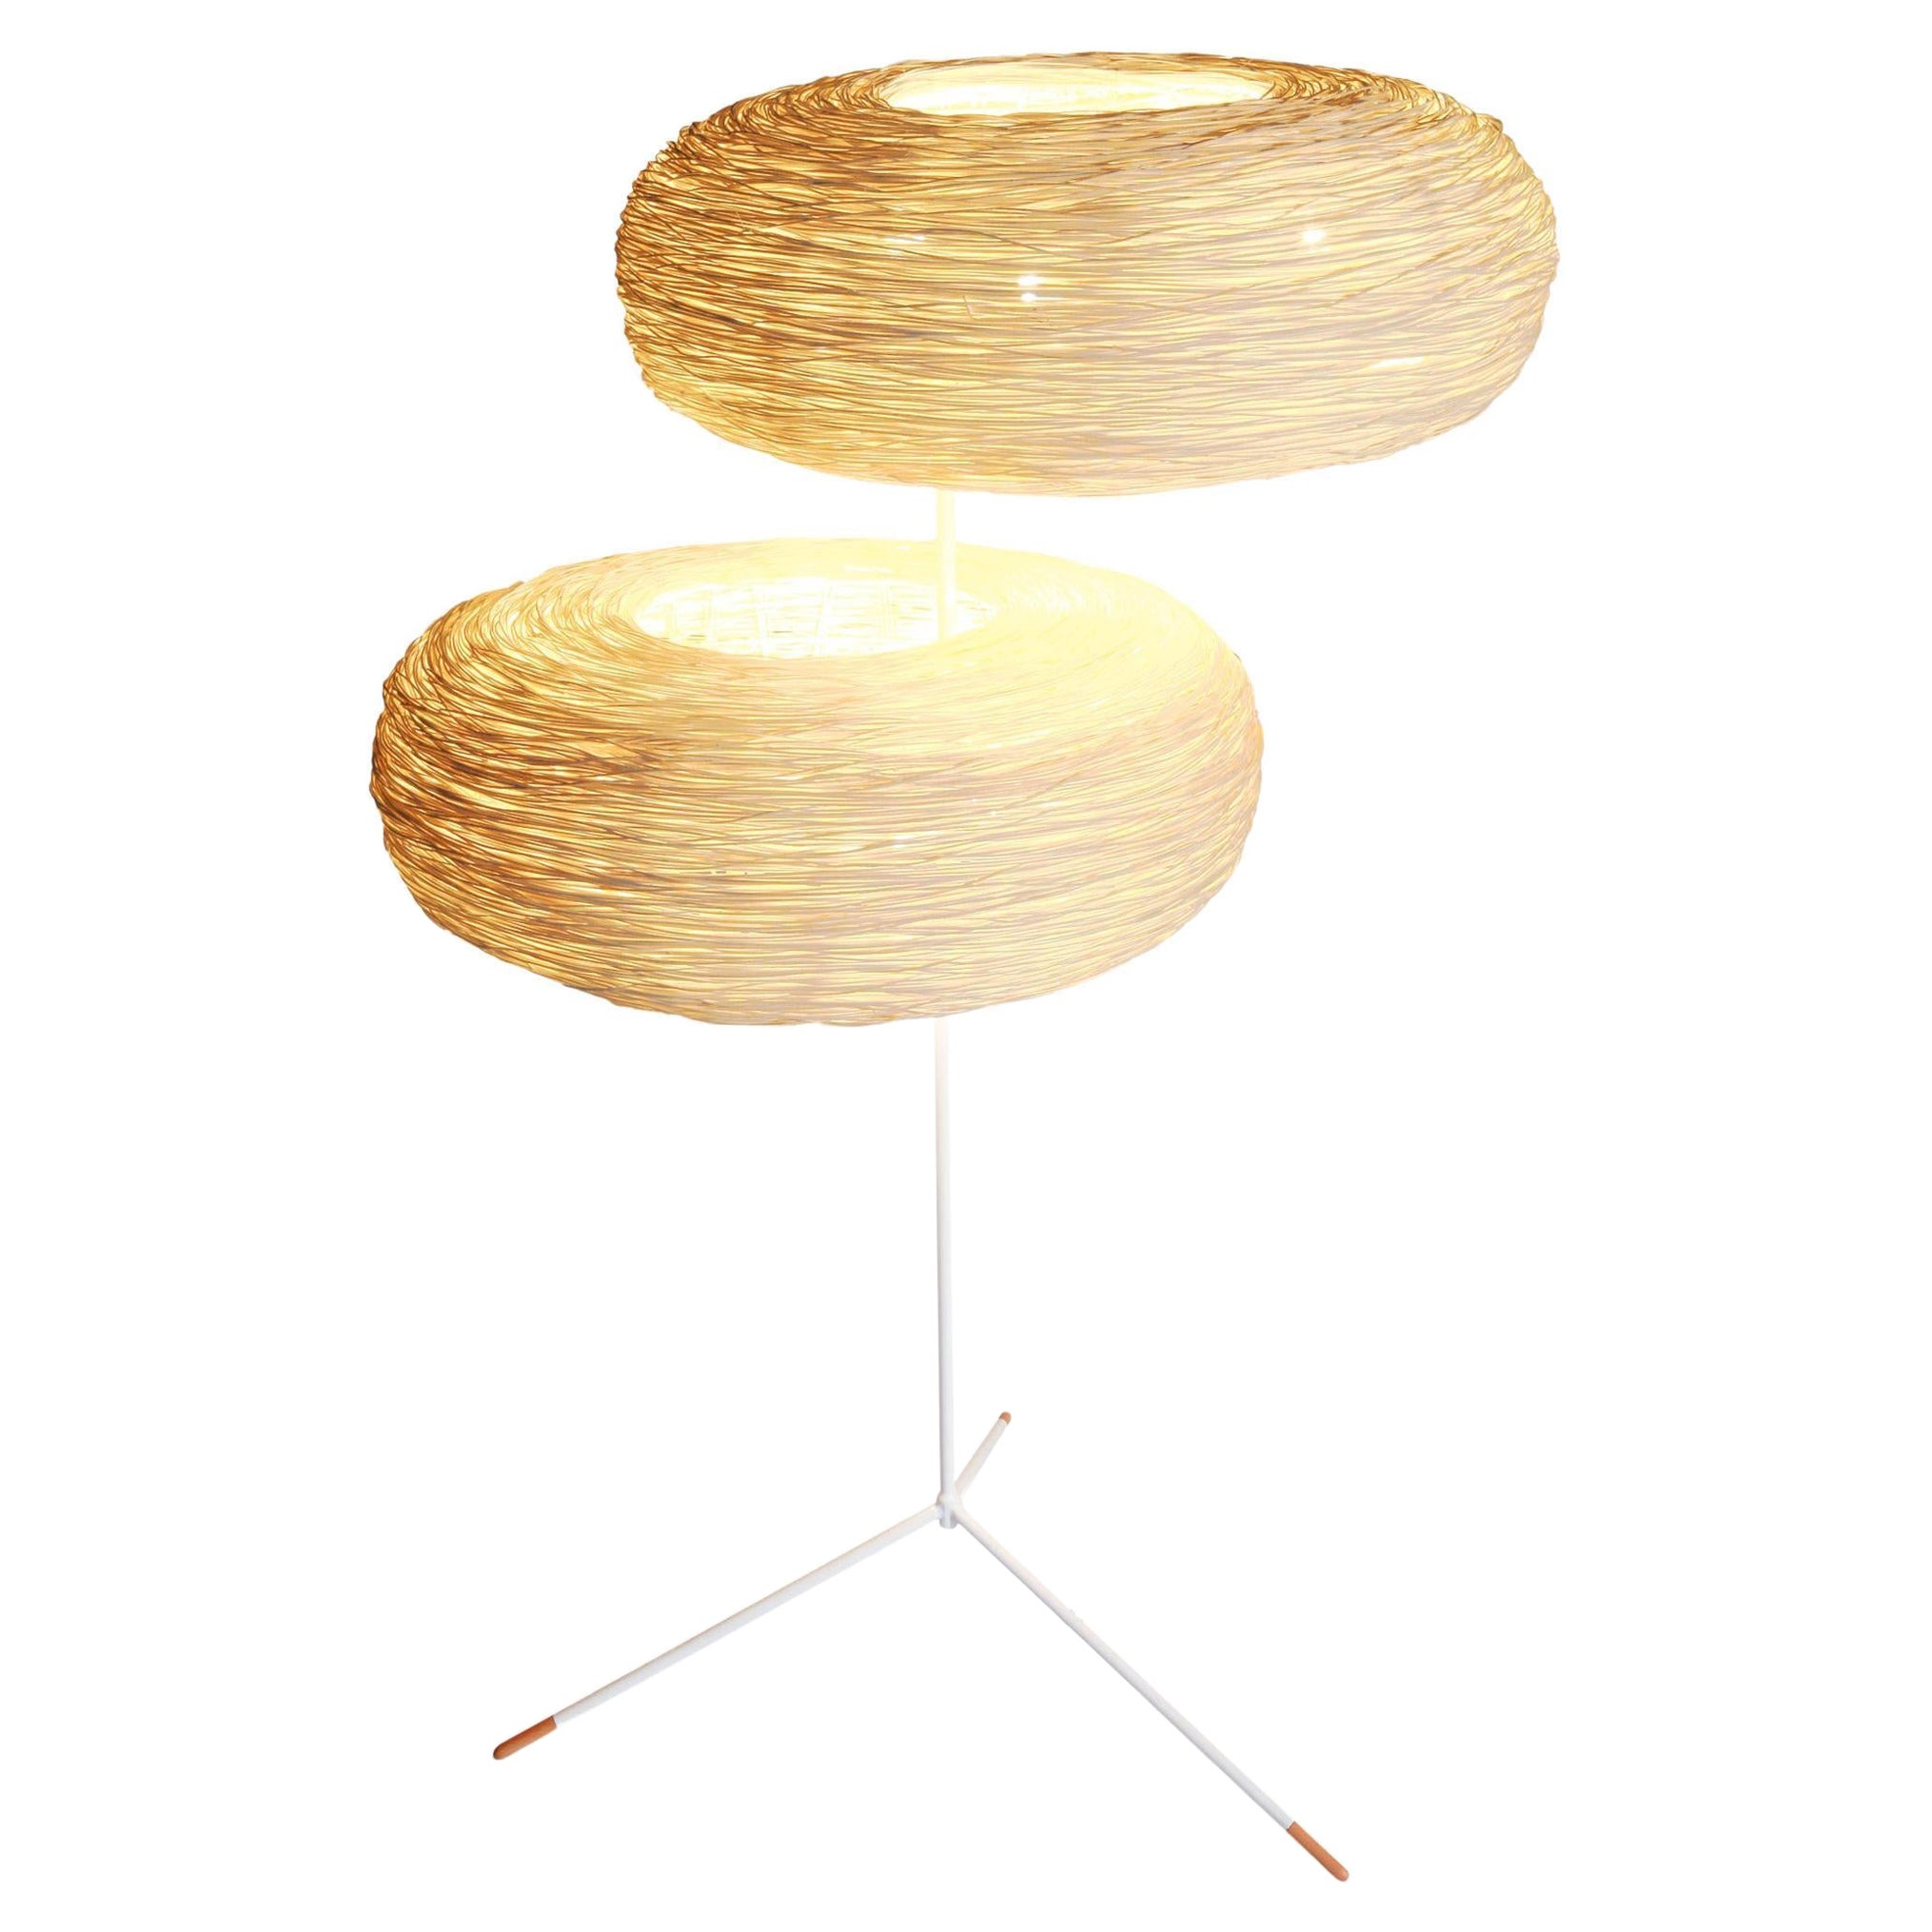 Double World by Ango, Double Rattan Hand-Woven Floor Lamp Design For Sale